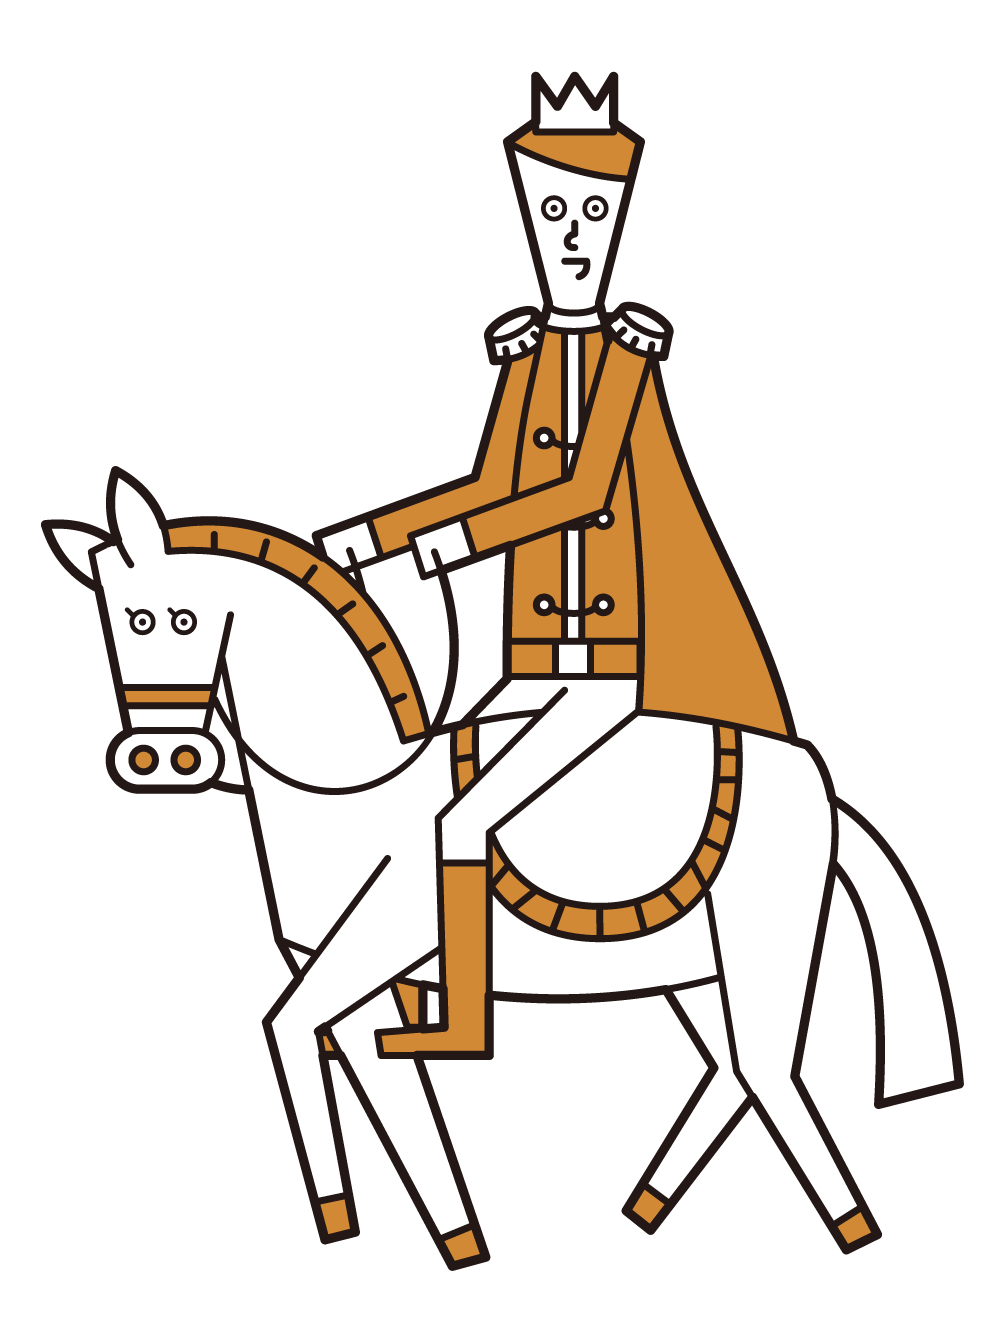 Illustration of a prince (male) on a white horse